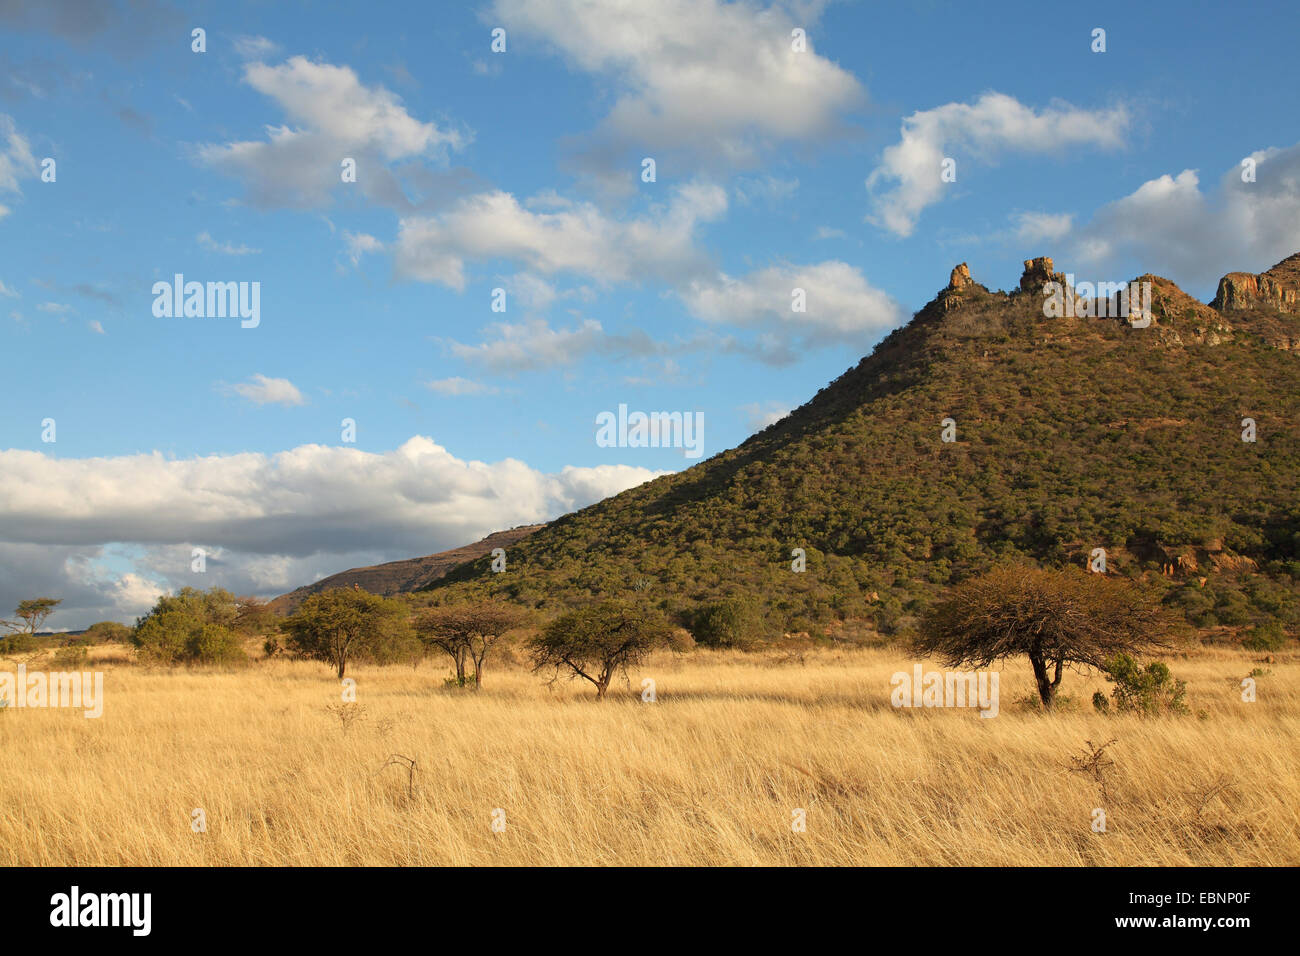 grassland in front of the Ngotshe Mountains, South Africa, Ithala Game Reserve Stock Photo